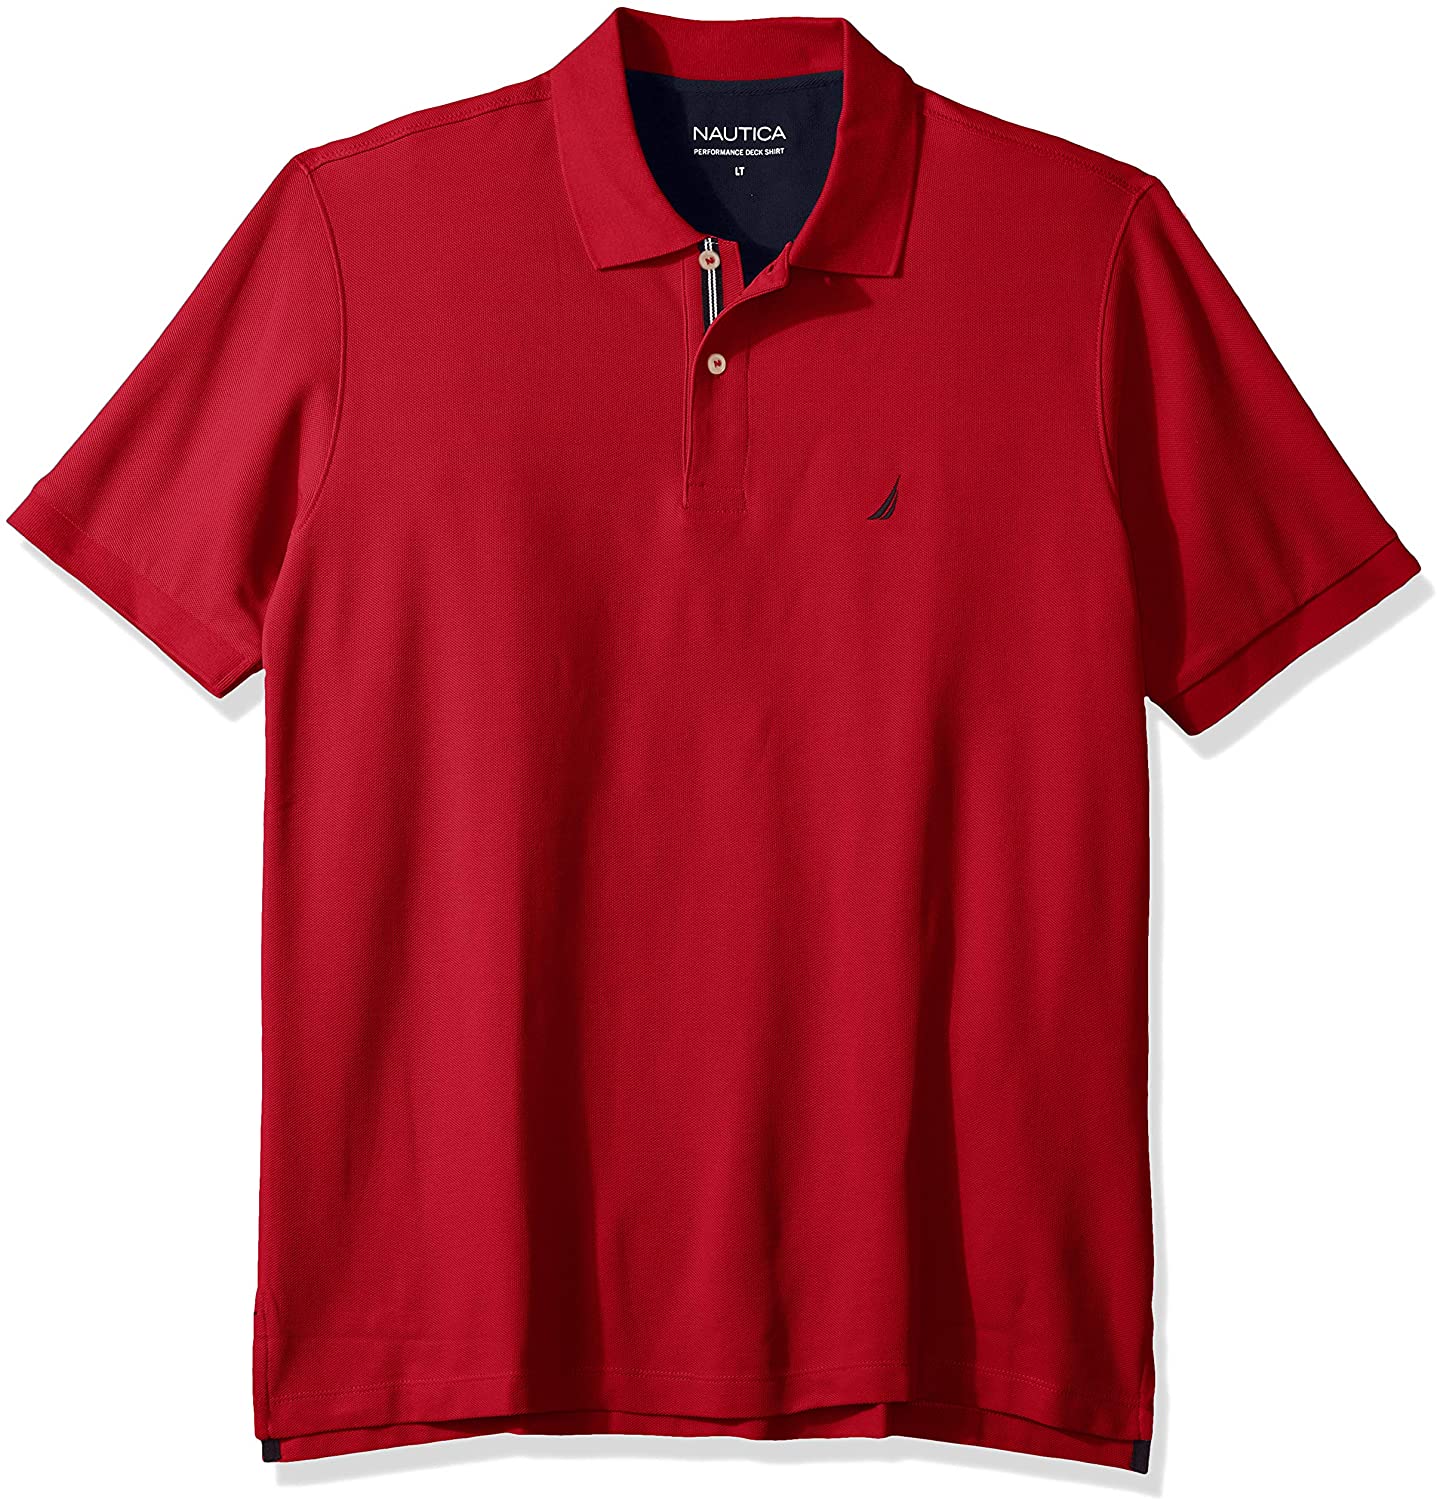 Nautica Men's Big and Tall Classic Fit Short Sleeve Solid Performance Deck  Polo